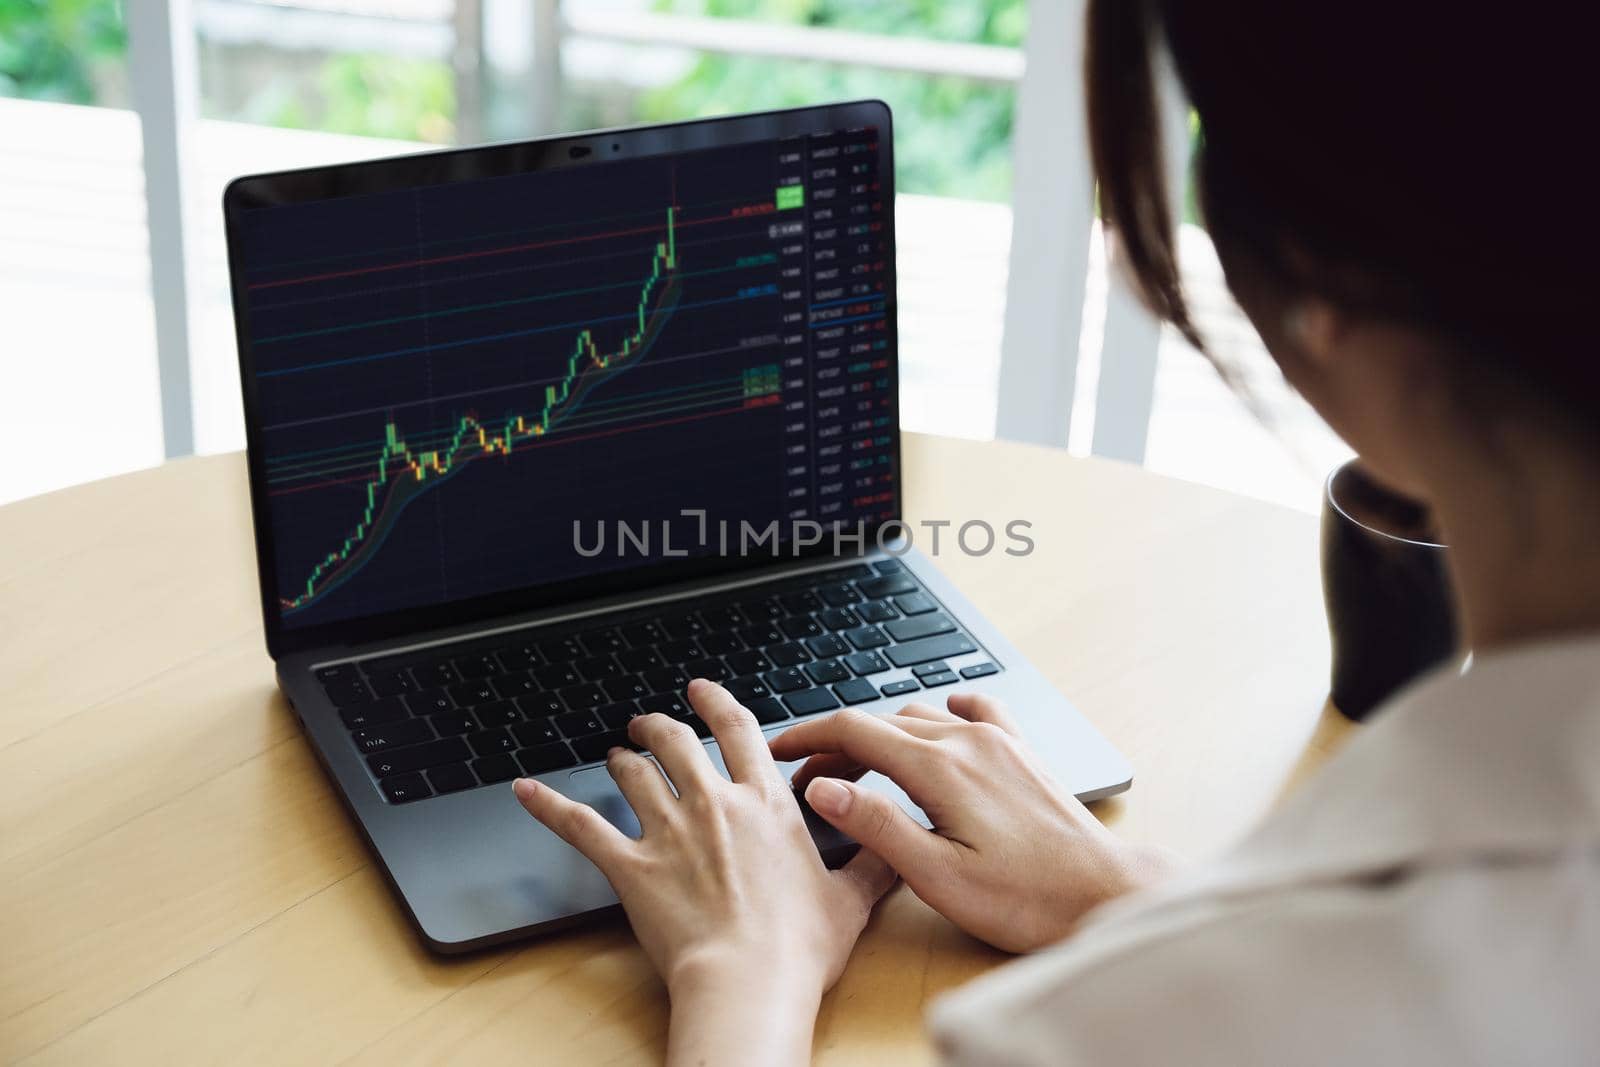 New normal, self-employed women are using a computer laptop to trade stocks for profit, buying and selling.